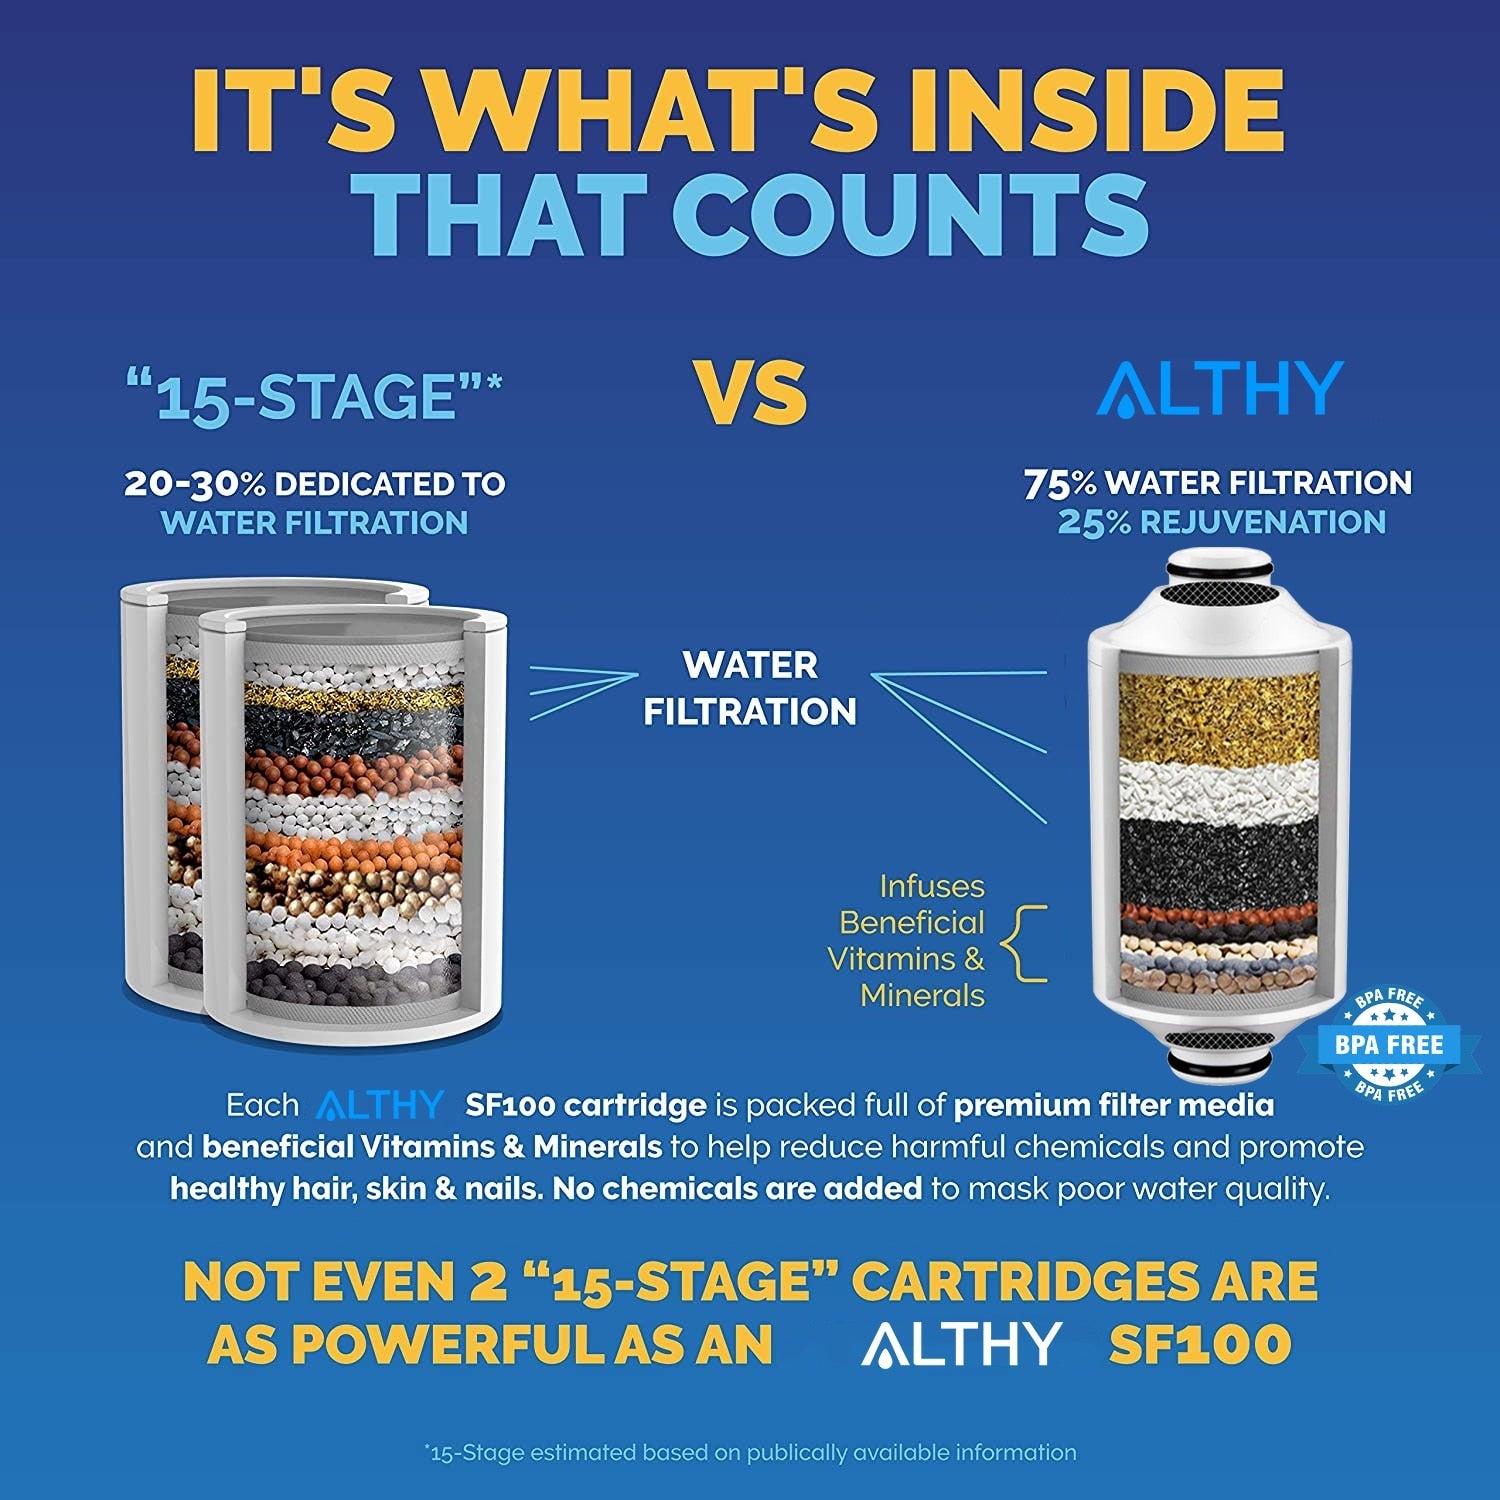 ALTHY Vitamin C Revitalizing Shower Water Filter - Reduces Dry Itchy Skin, Dandruff, Eczema, Dramatically & Improves Skin, Hair  Hardware > Plumbing > Water Dispensing & Filtration 138.52 EZYSELLA SHOP